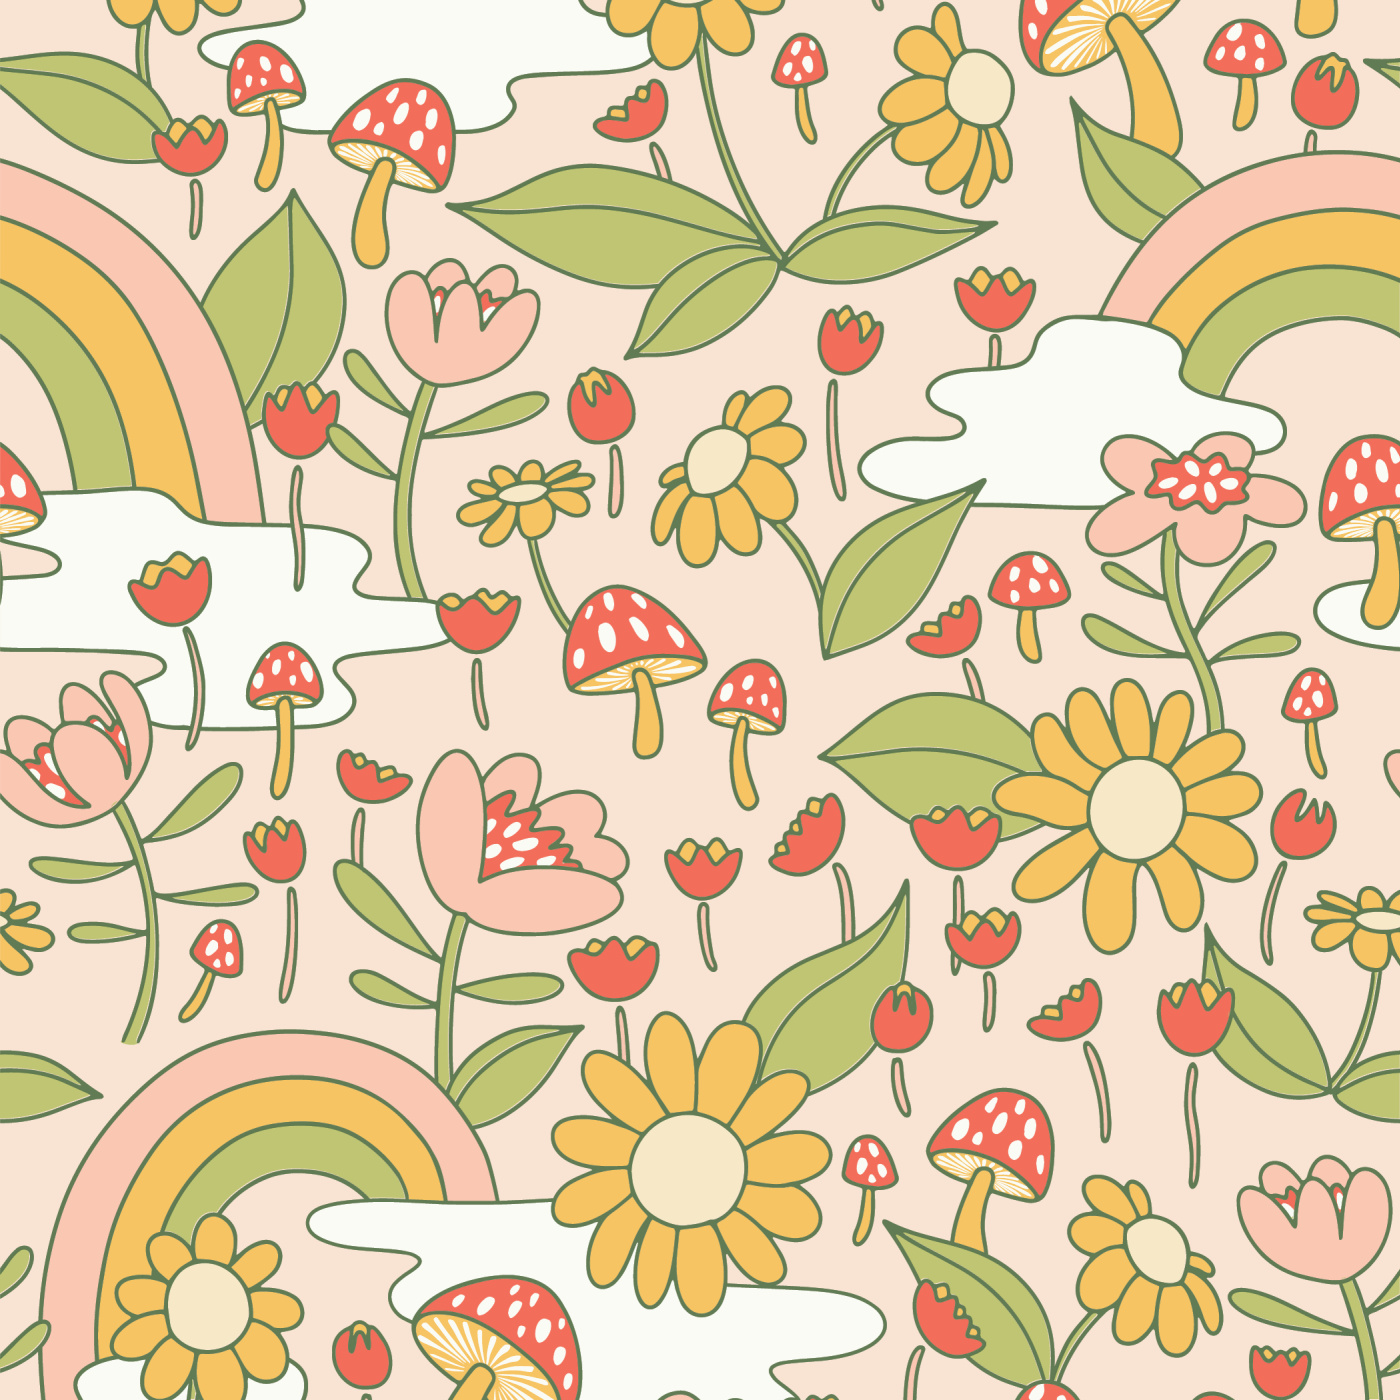 Groovy Fabric Wallpaper and Home Decor  Spoonflower